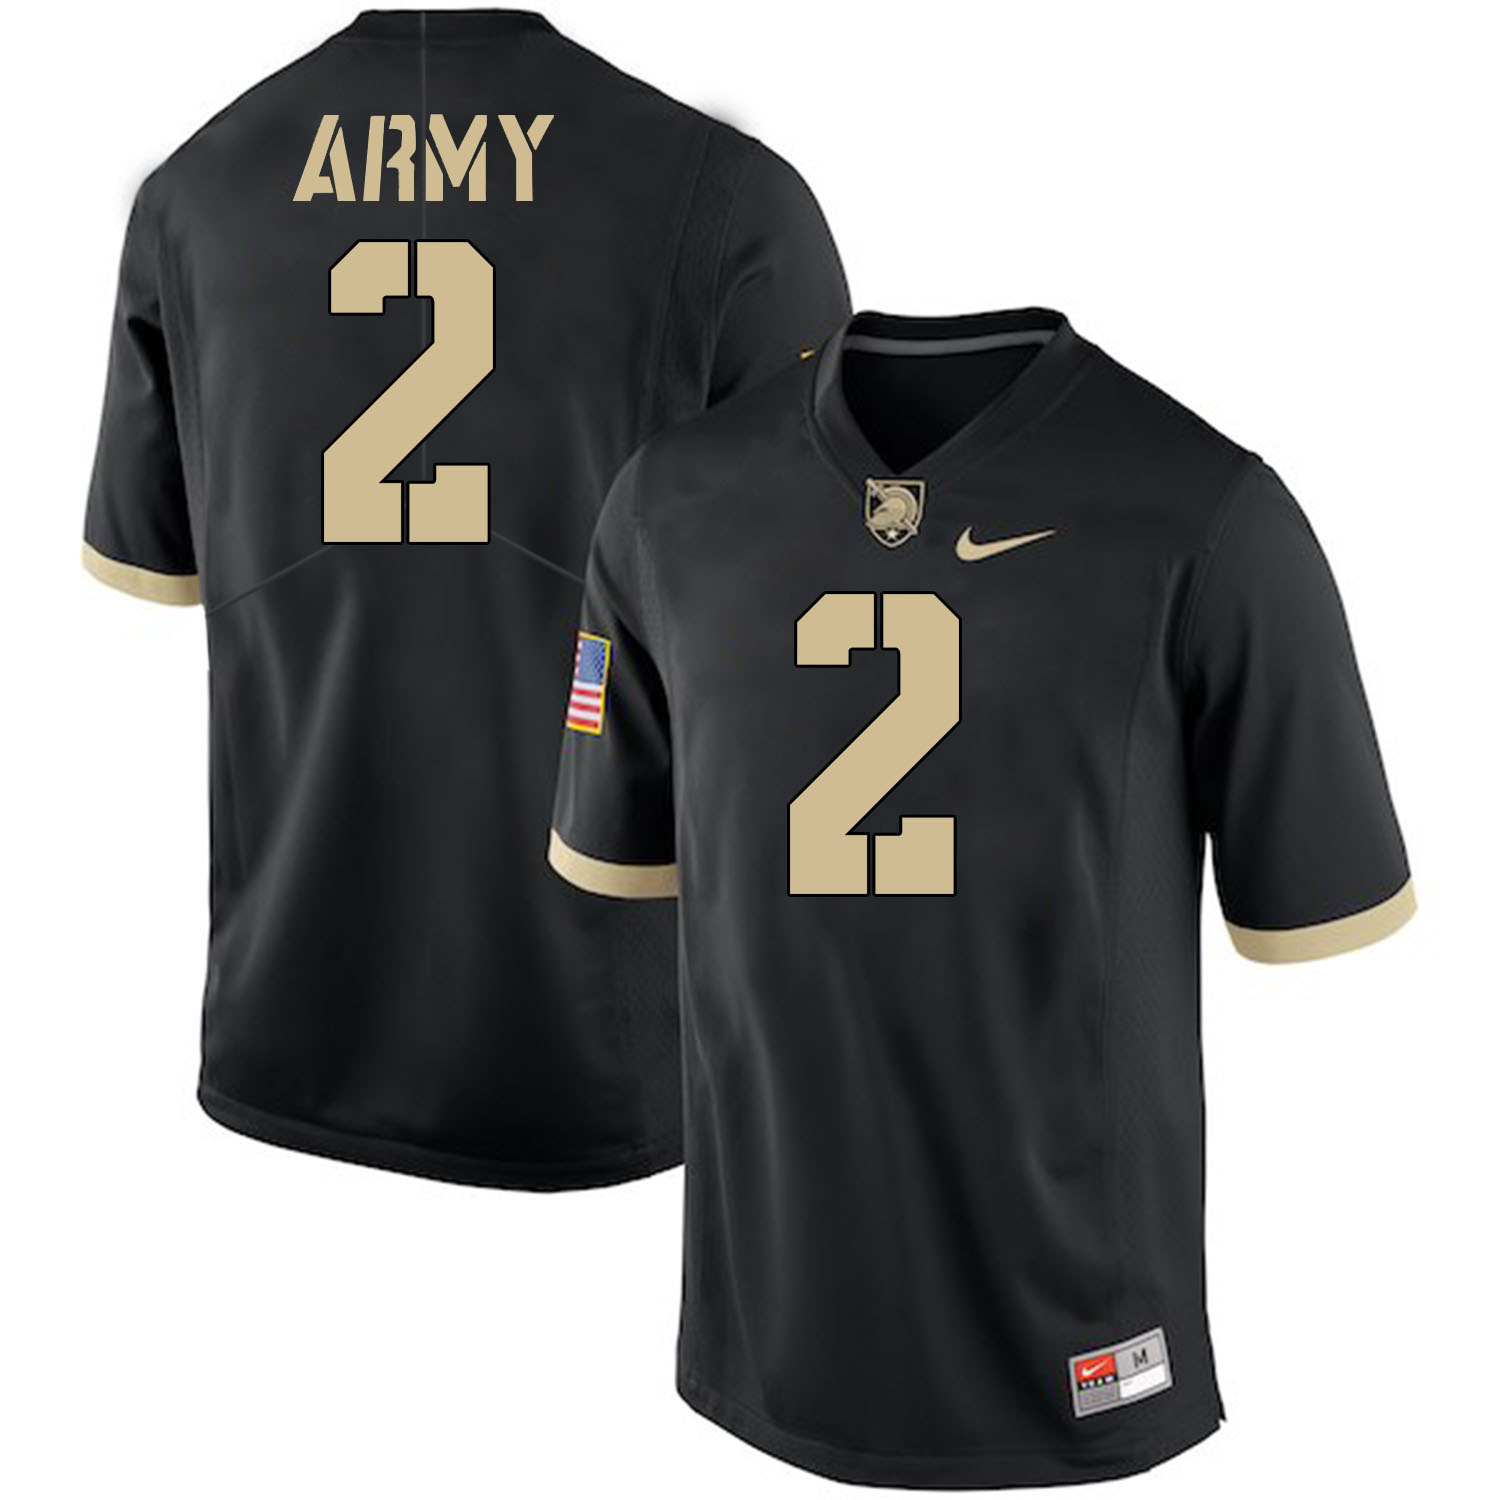 Army Black Knights 2 James Gibson Black College Football Jersey